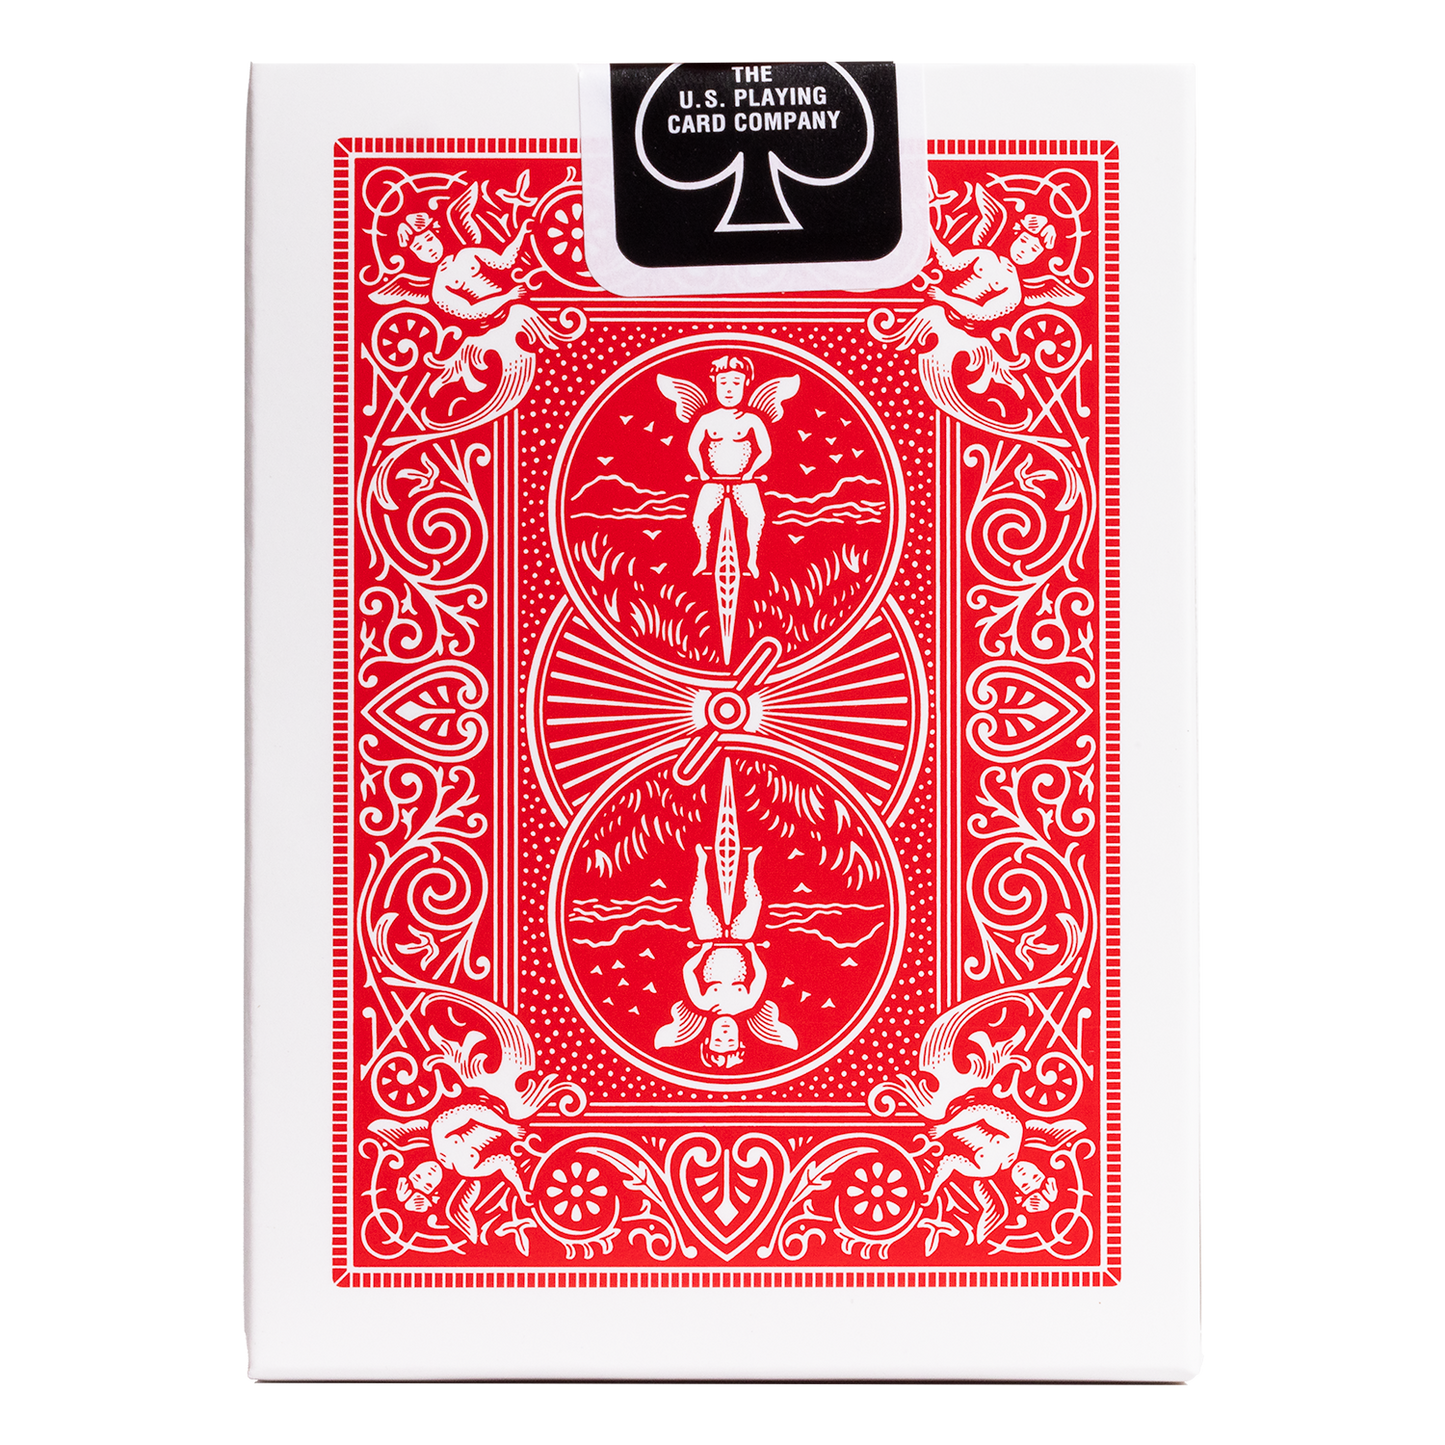 Bicycle Rider Back x Butterfly Marked Deck